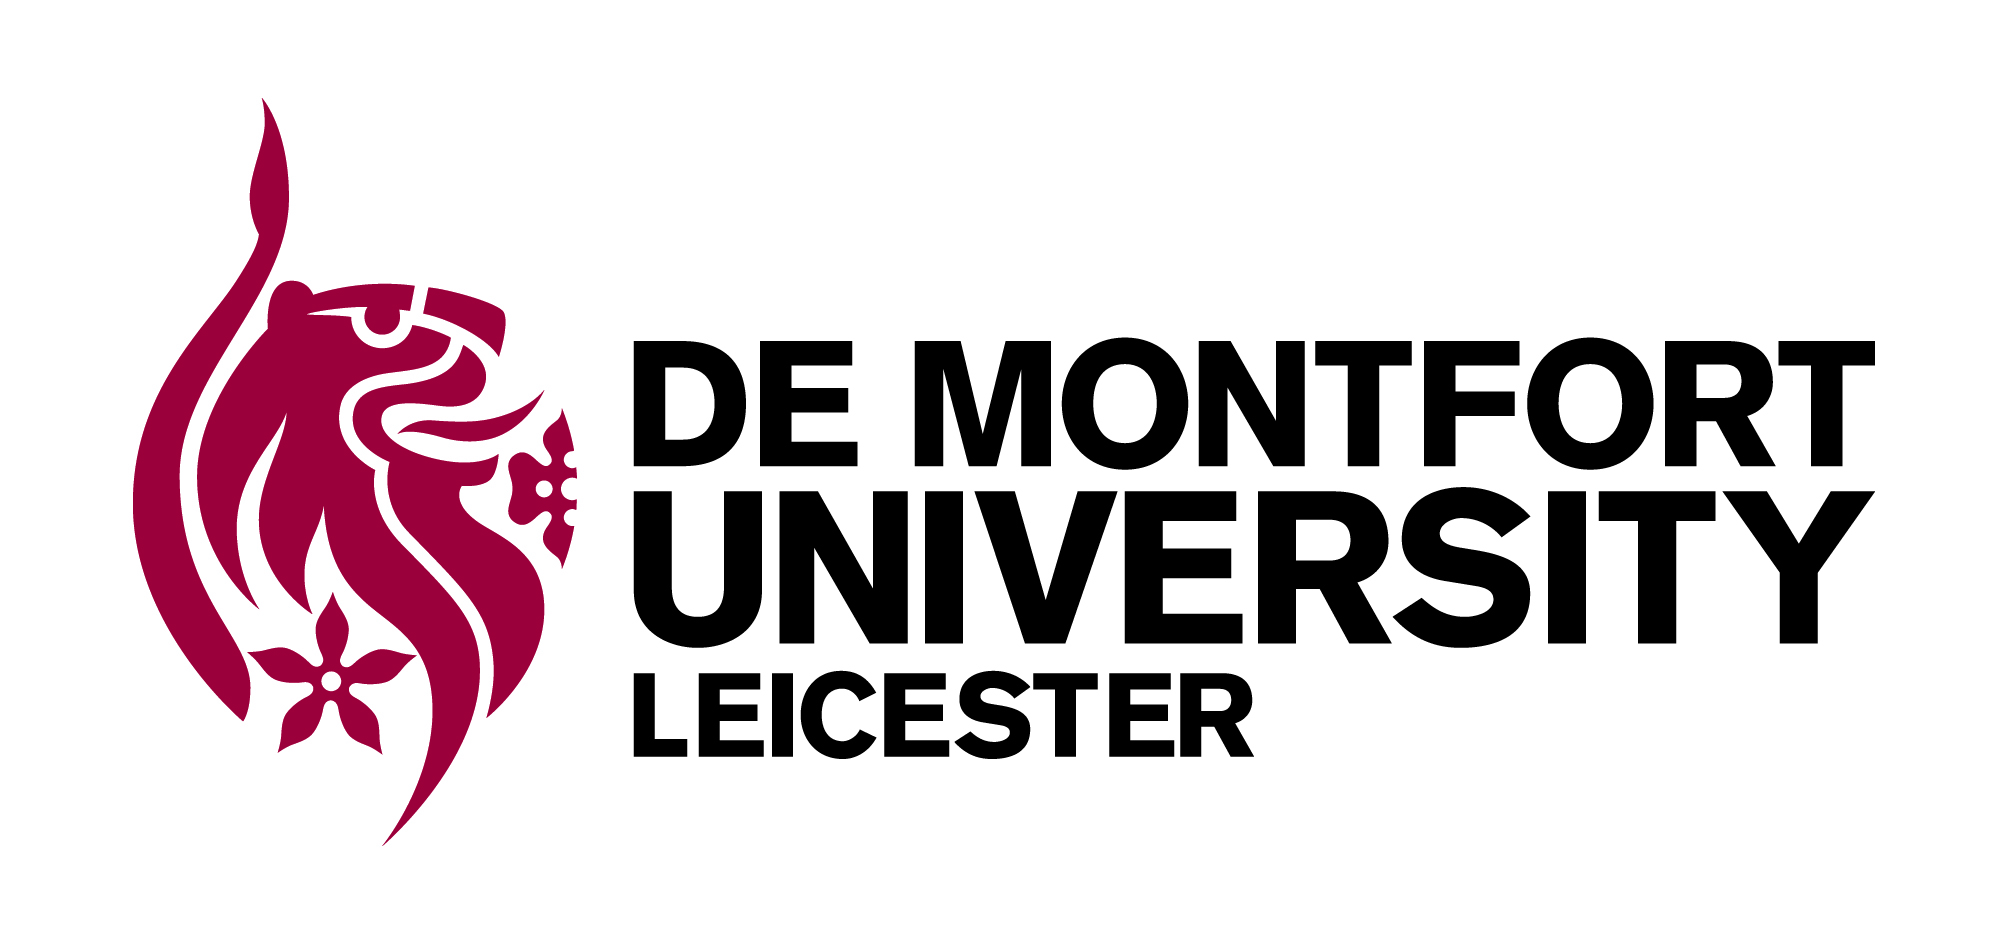 De Montfort University has been nominated for the Public Sector Equality Awards at the PinkNews Awards 2020